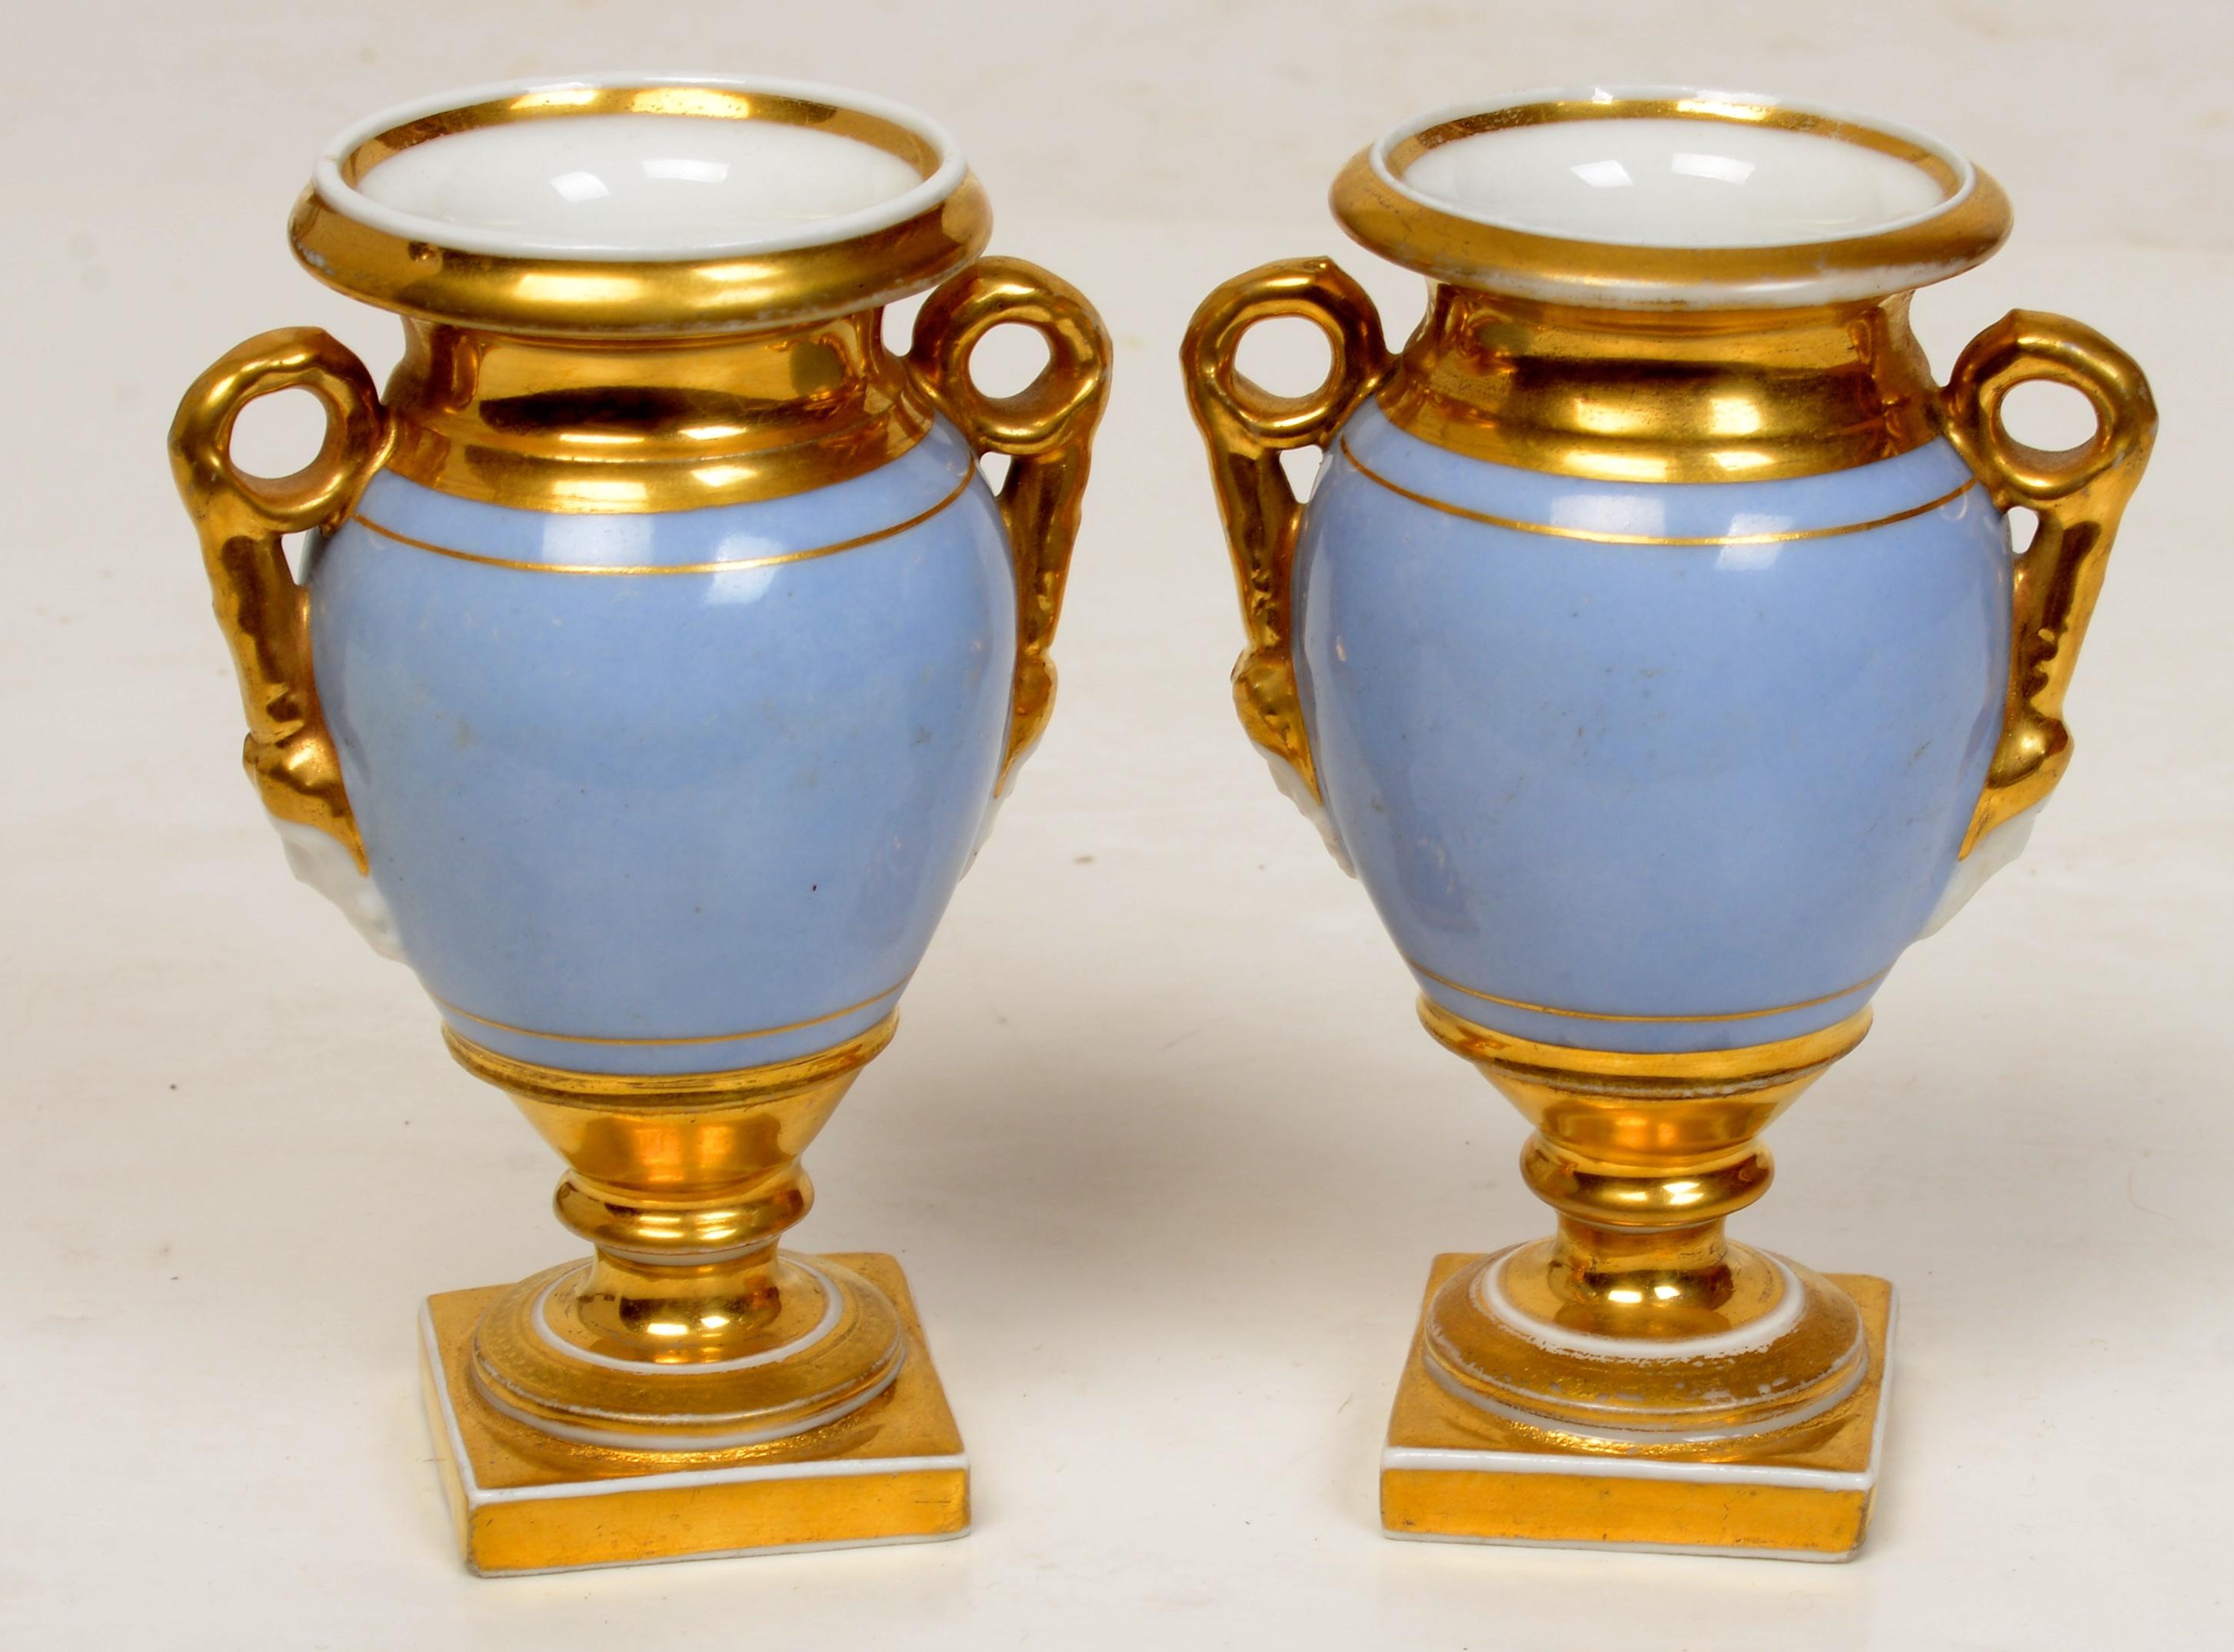 Pair of Old Paris Miniature, Gilt Decorated Footed Urns with garden scenes, c1800. Miniature urns of this type are rare and the decoration is exceptional. The urns have bolted construction with scrolling handles and molded face mask terminals. The